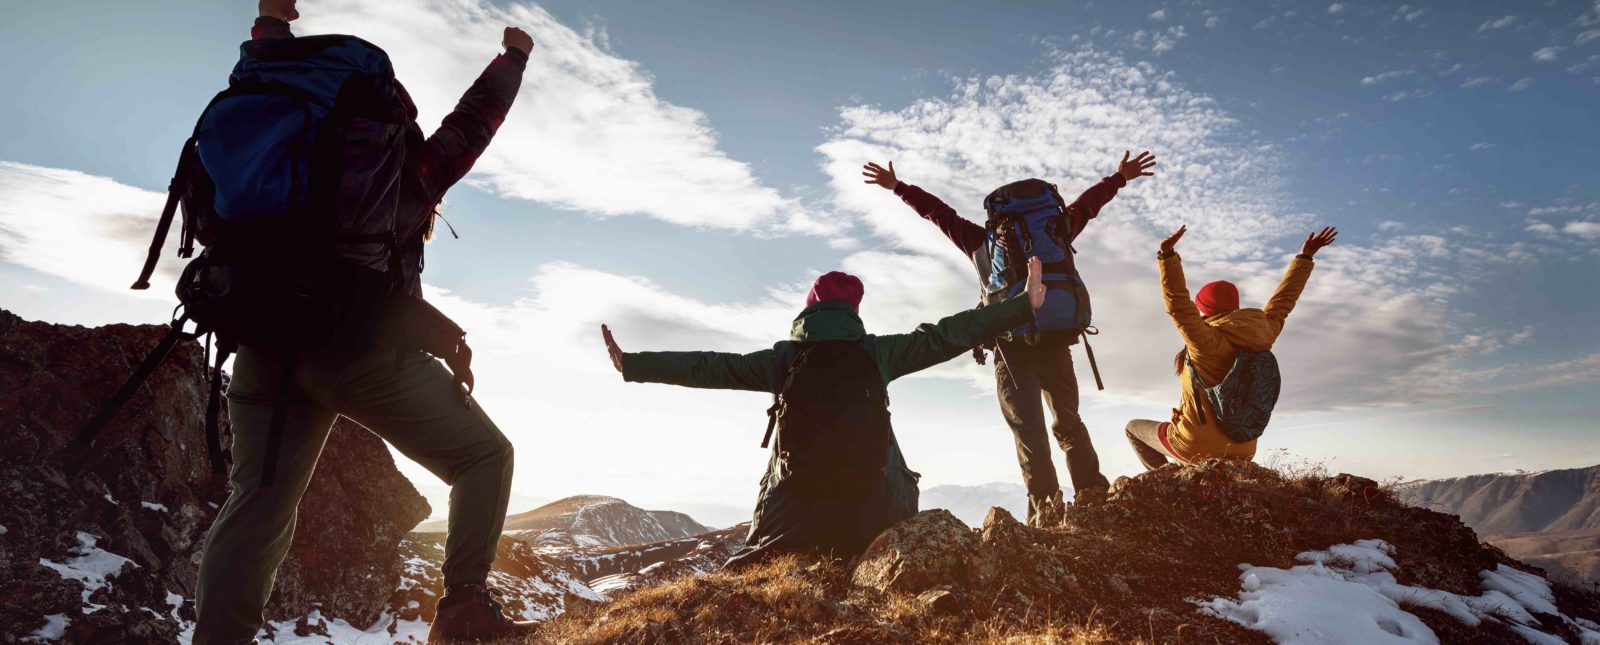 Four happy hikers stands in winner poses at mountain top at sunset time